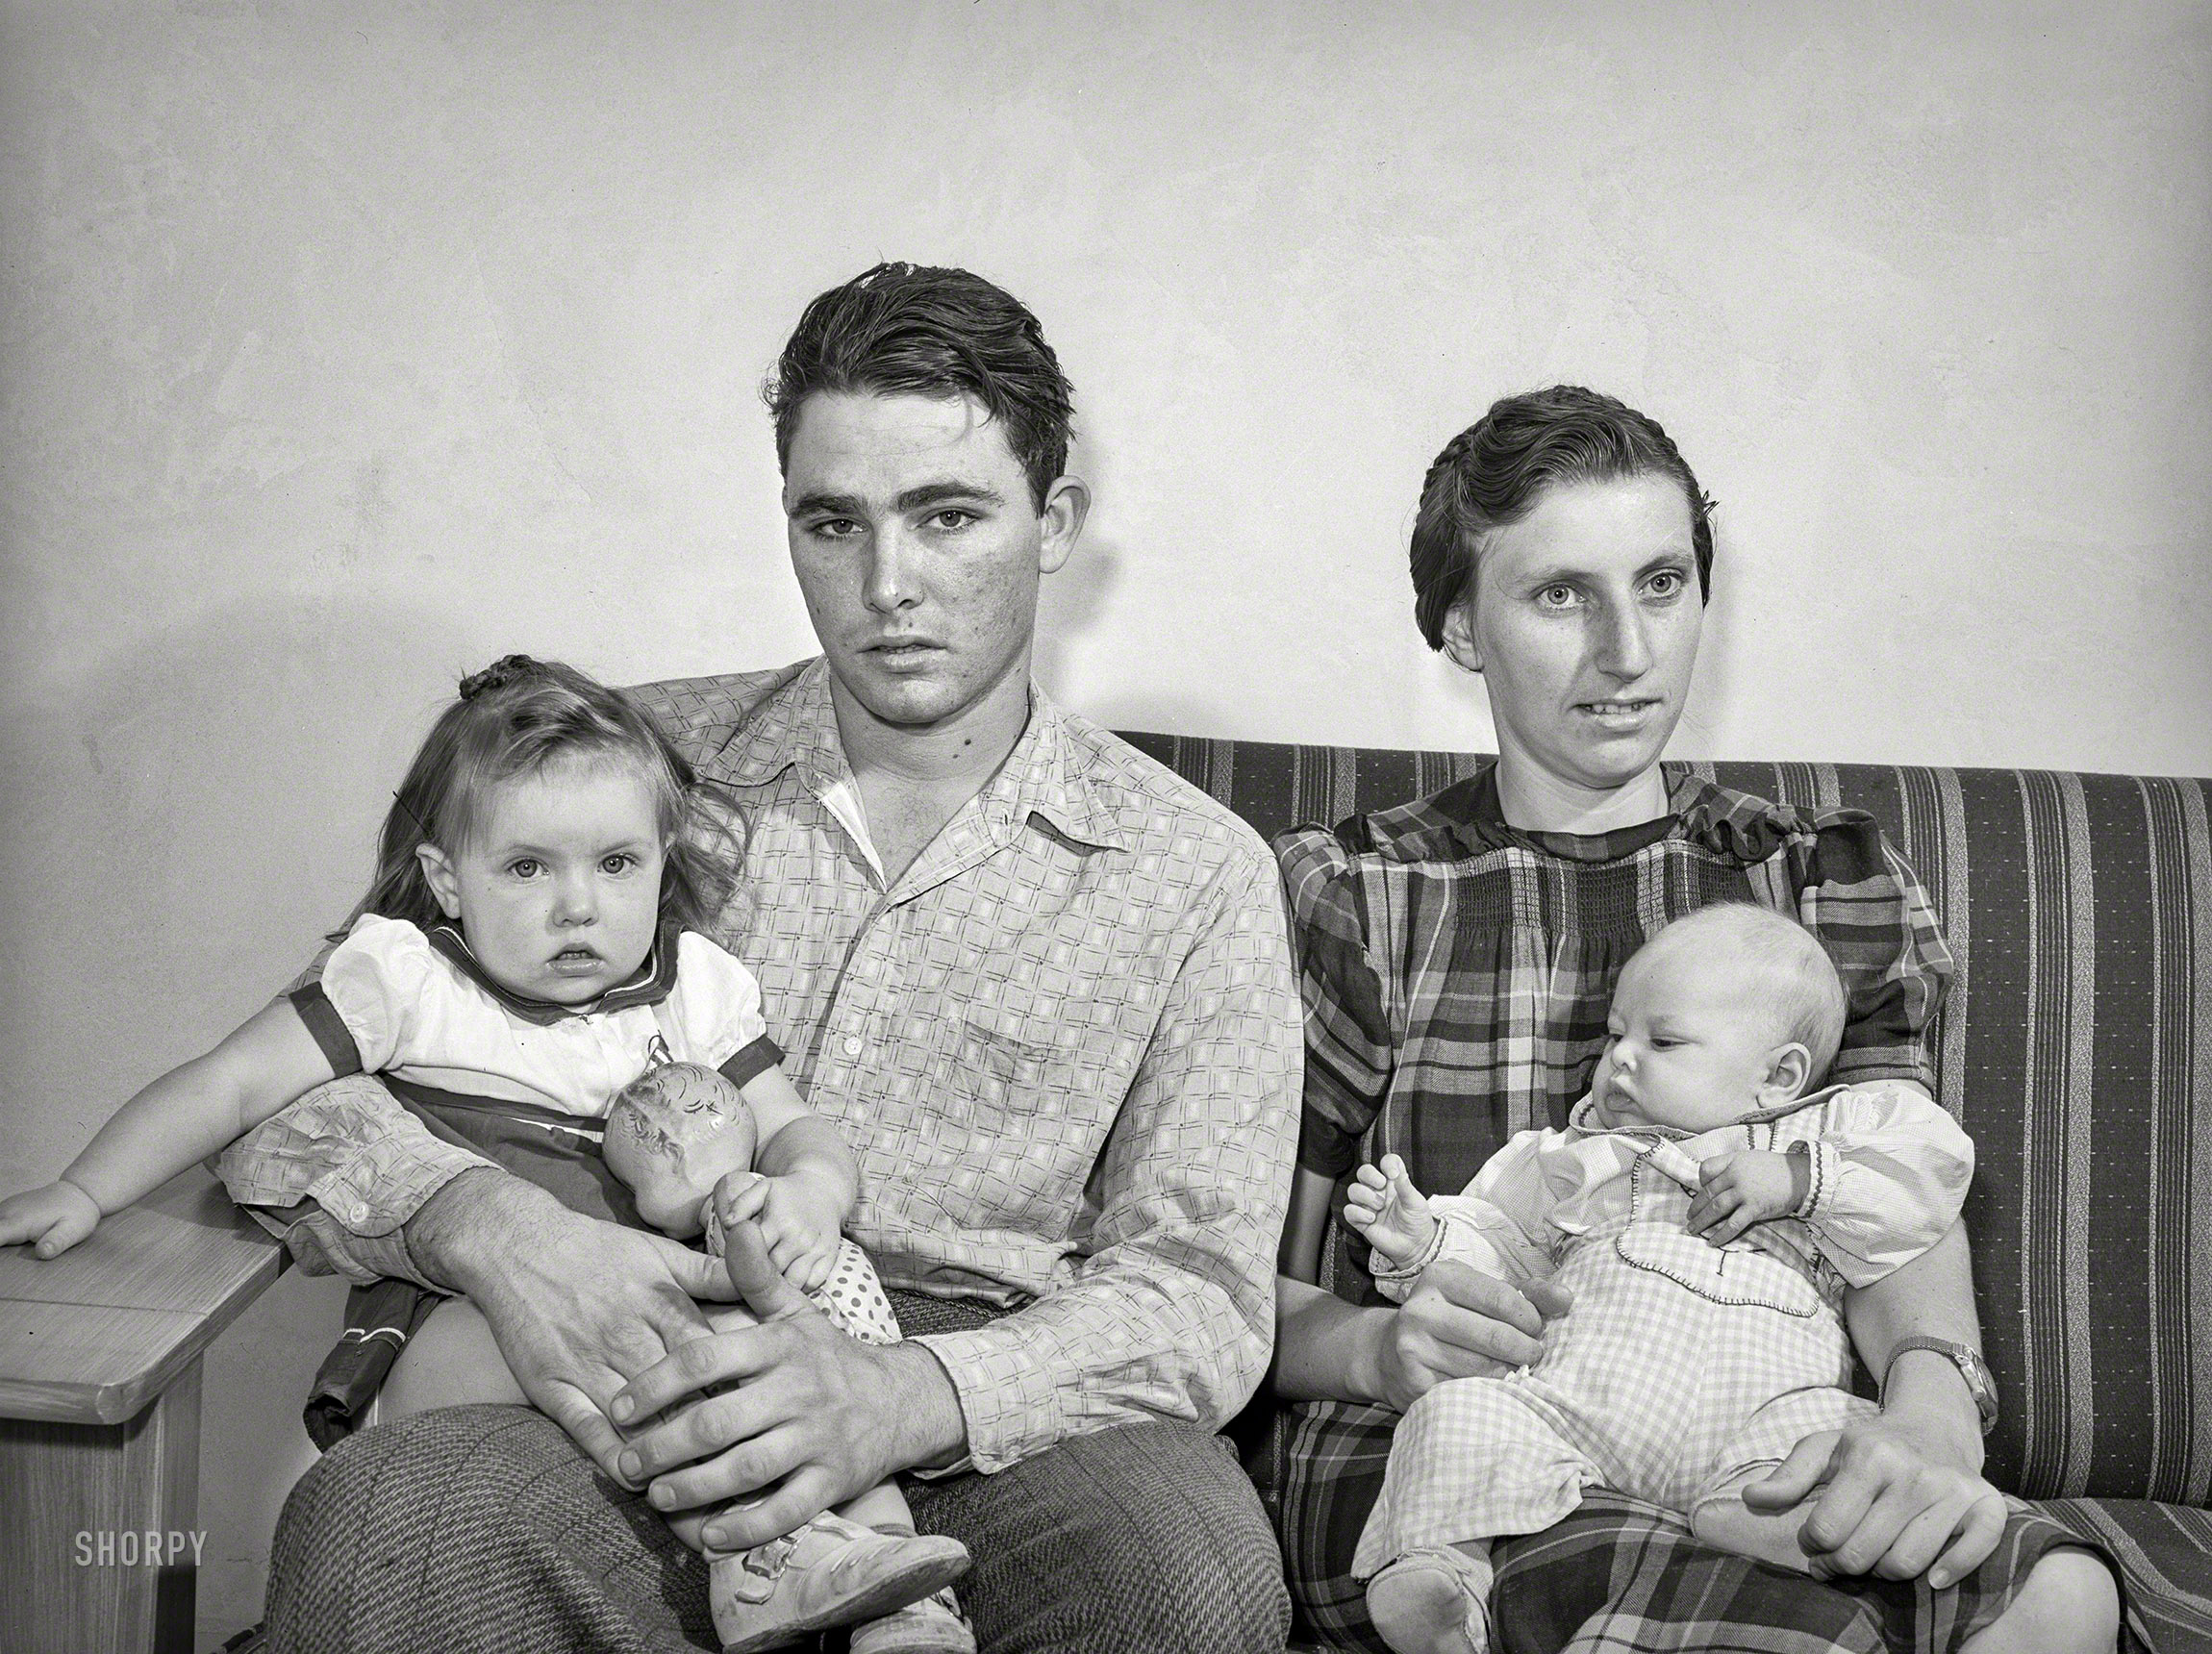 May 1941. San Diego. "Family living at Kearney Mesa defense housing project. This man came to California from Oklahoma 10 years ago. He has been an agricultural worker living in various FSA camps. Now employed as a painter at Consolidated Aircraft." Acetate negative by Russell Lee for the Farm Security Administration. View full size.